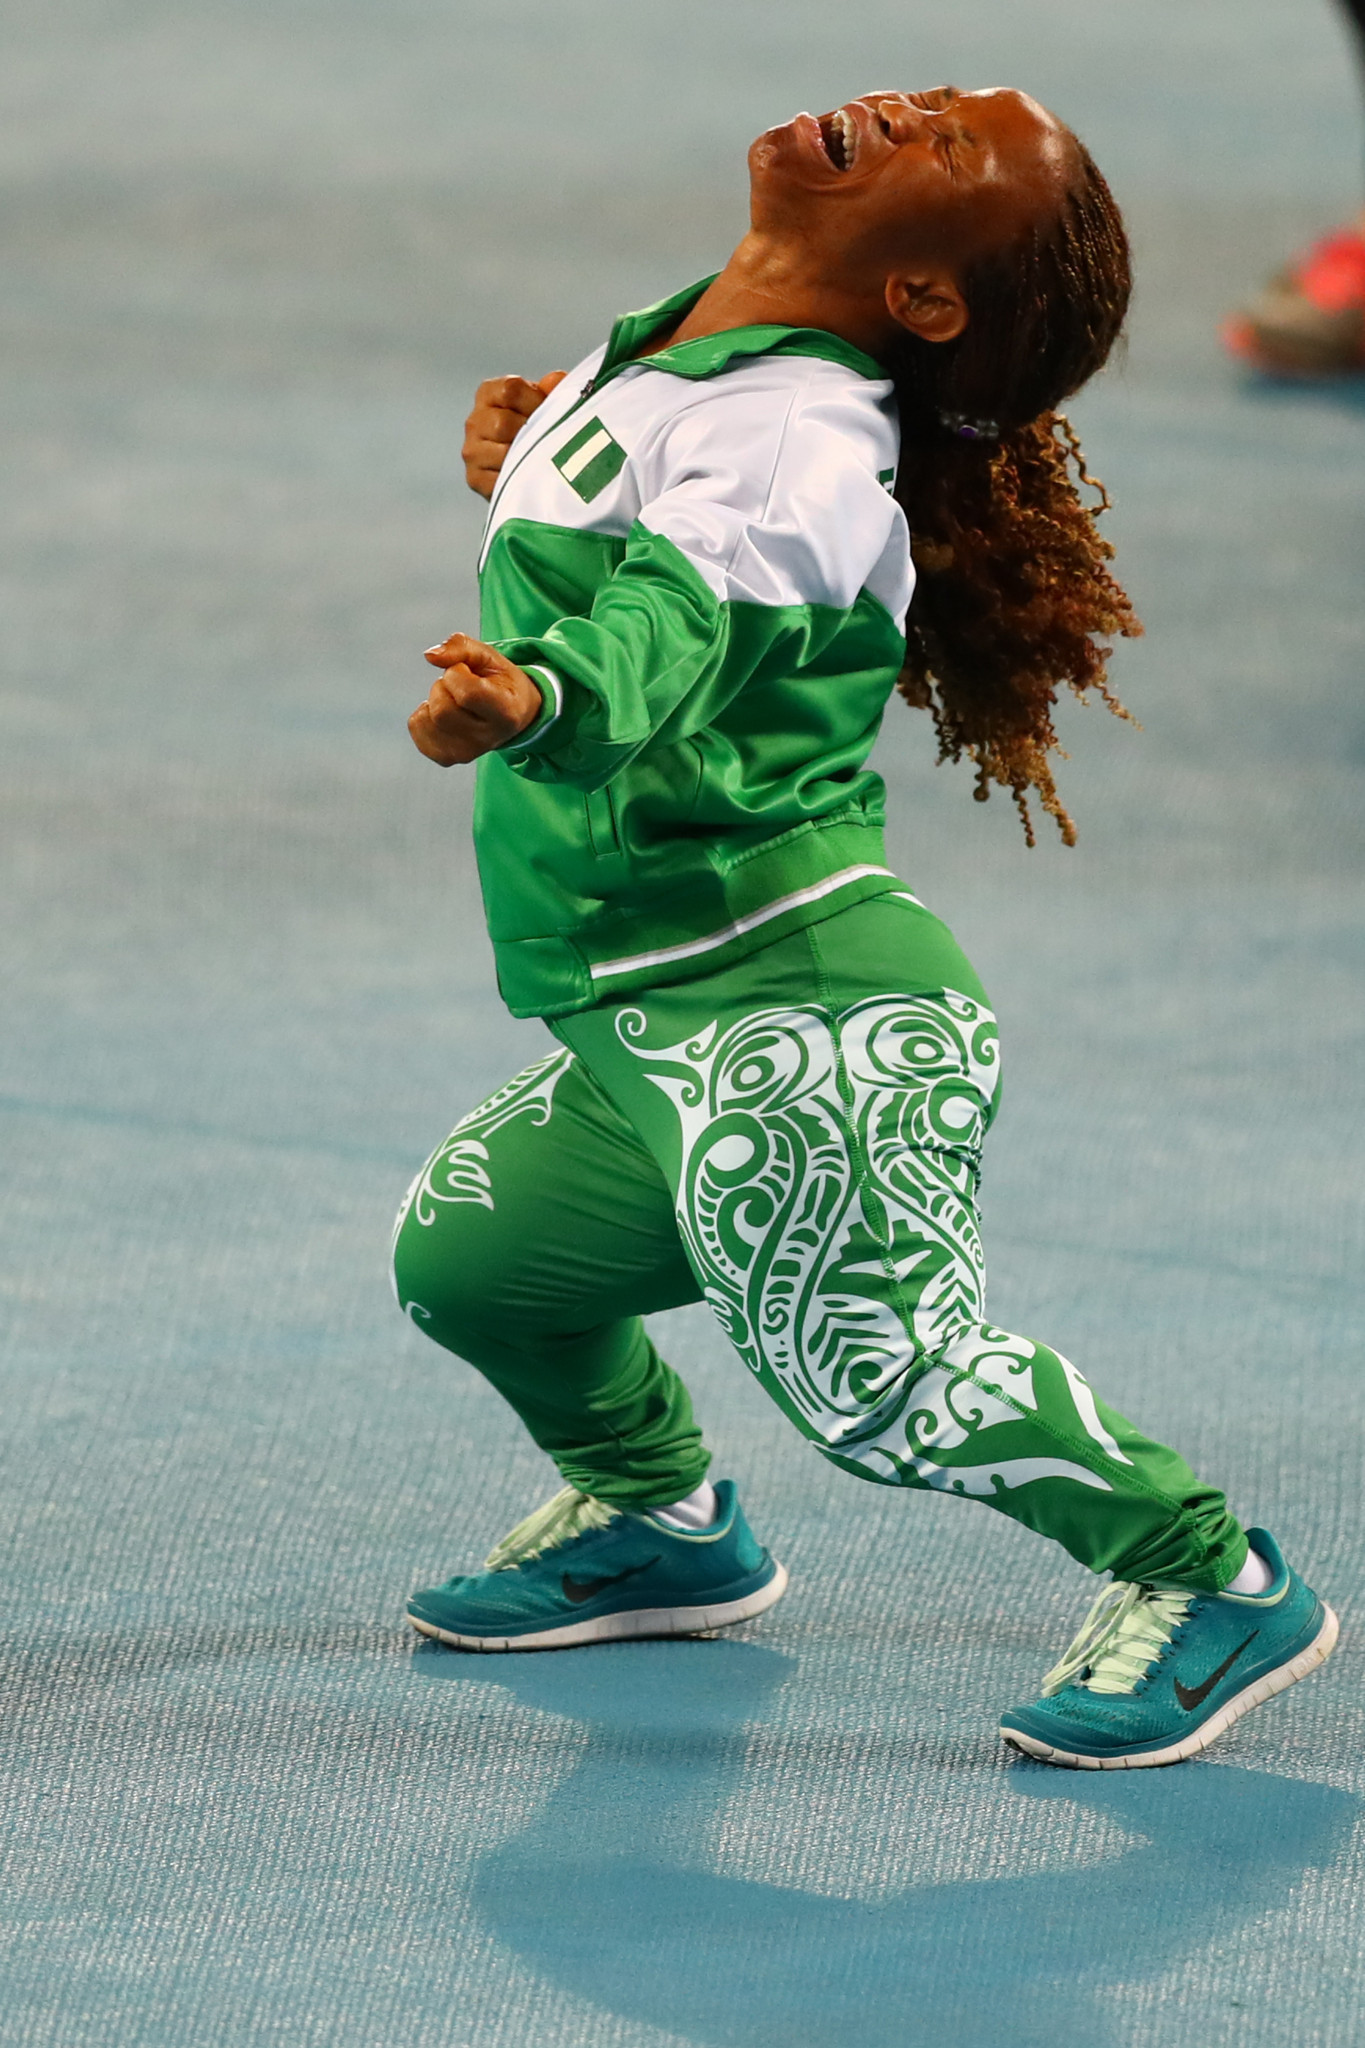 Lauritta Onye of Nigeria celebrates after breaking the world record in the women's shot put at the Rio 2016 Paralympic Games, an event plagued with problems  ©Getty Images